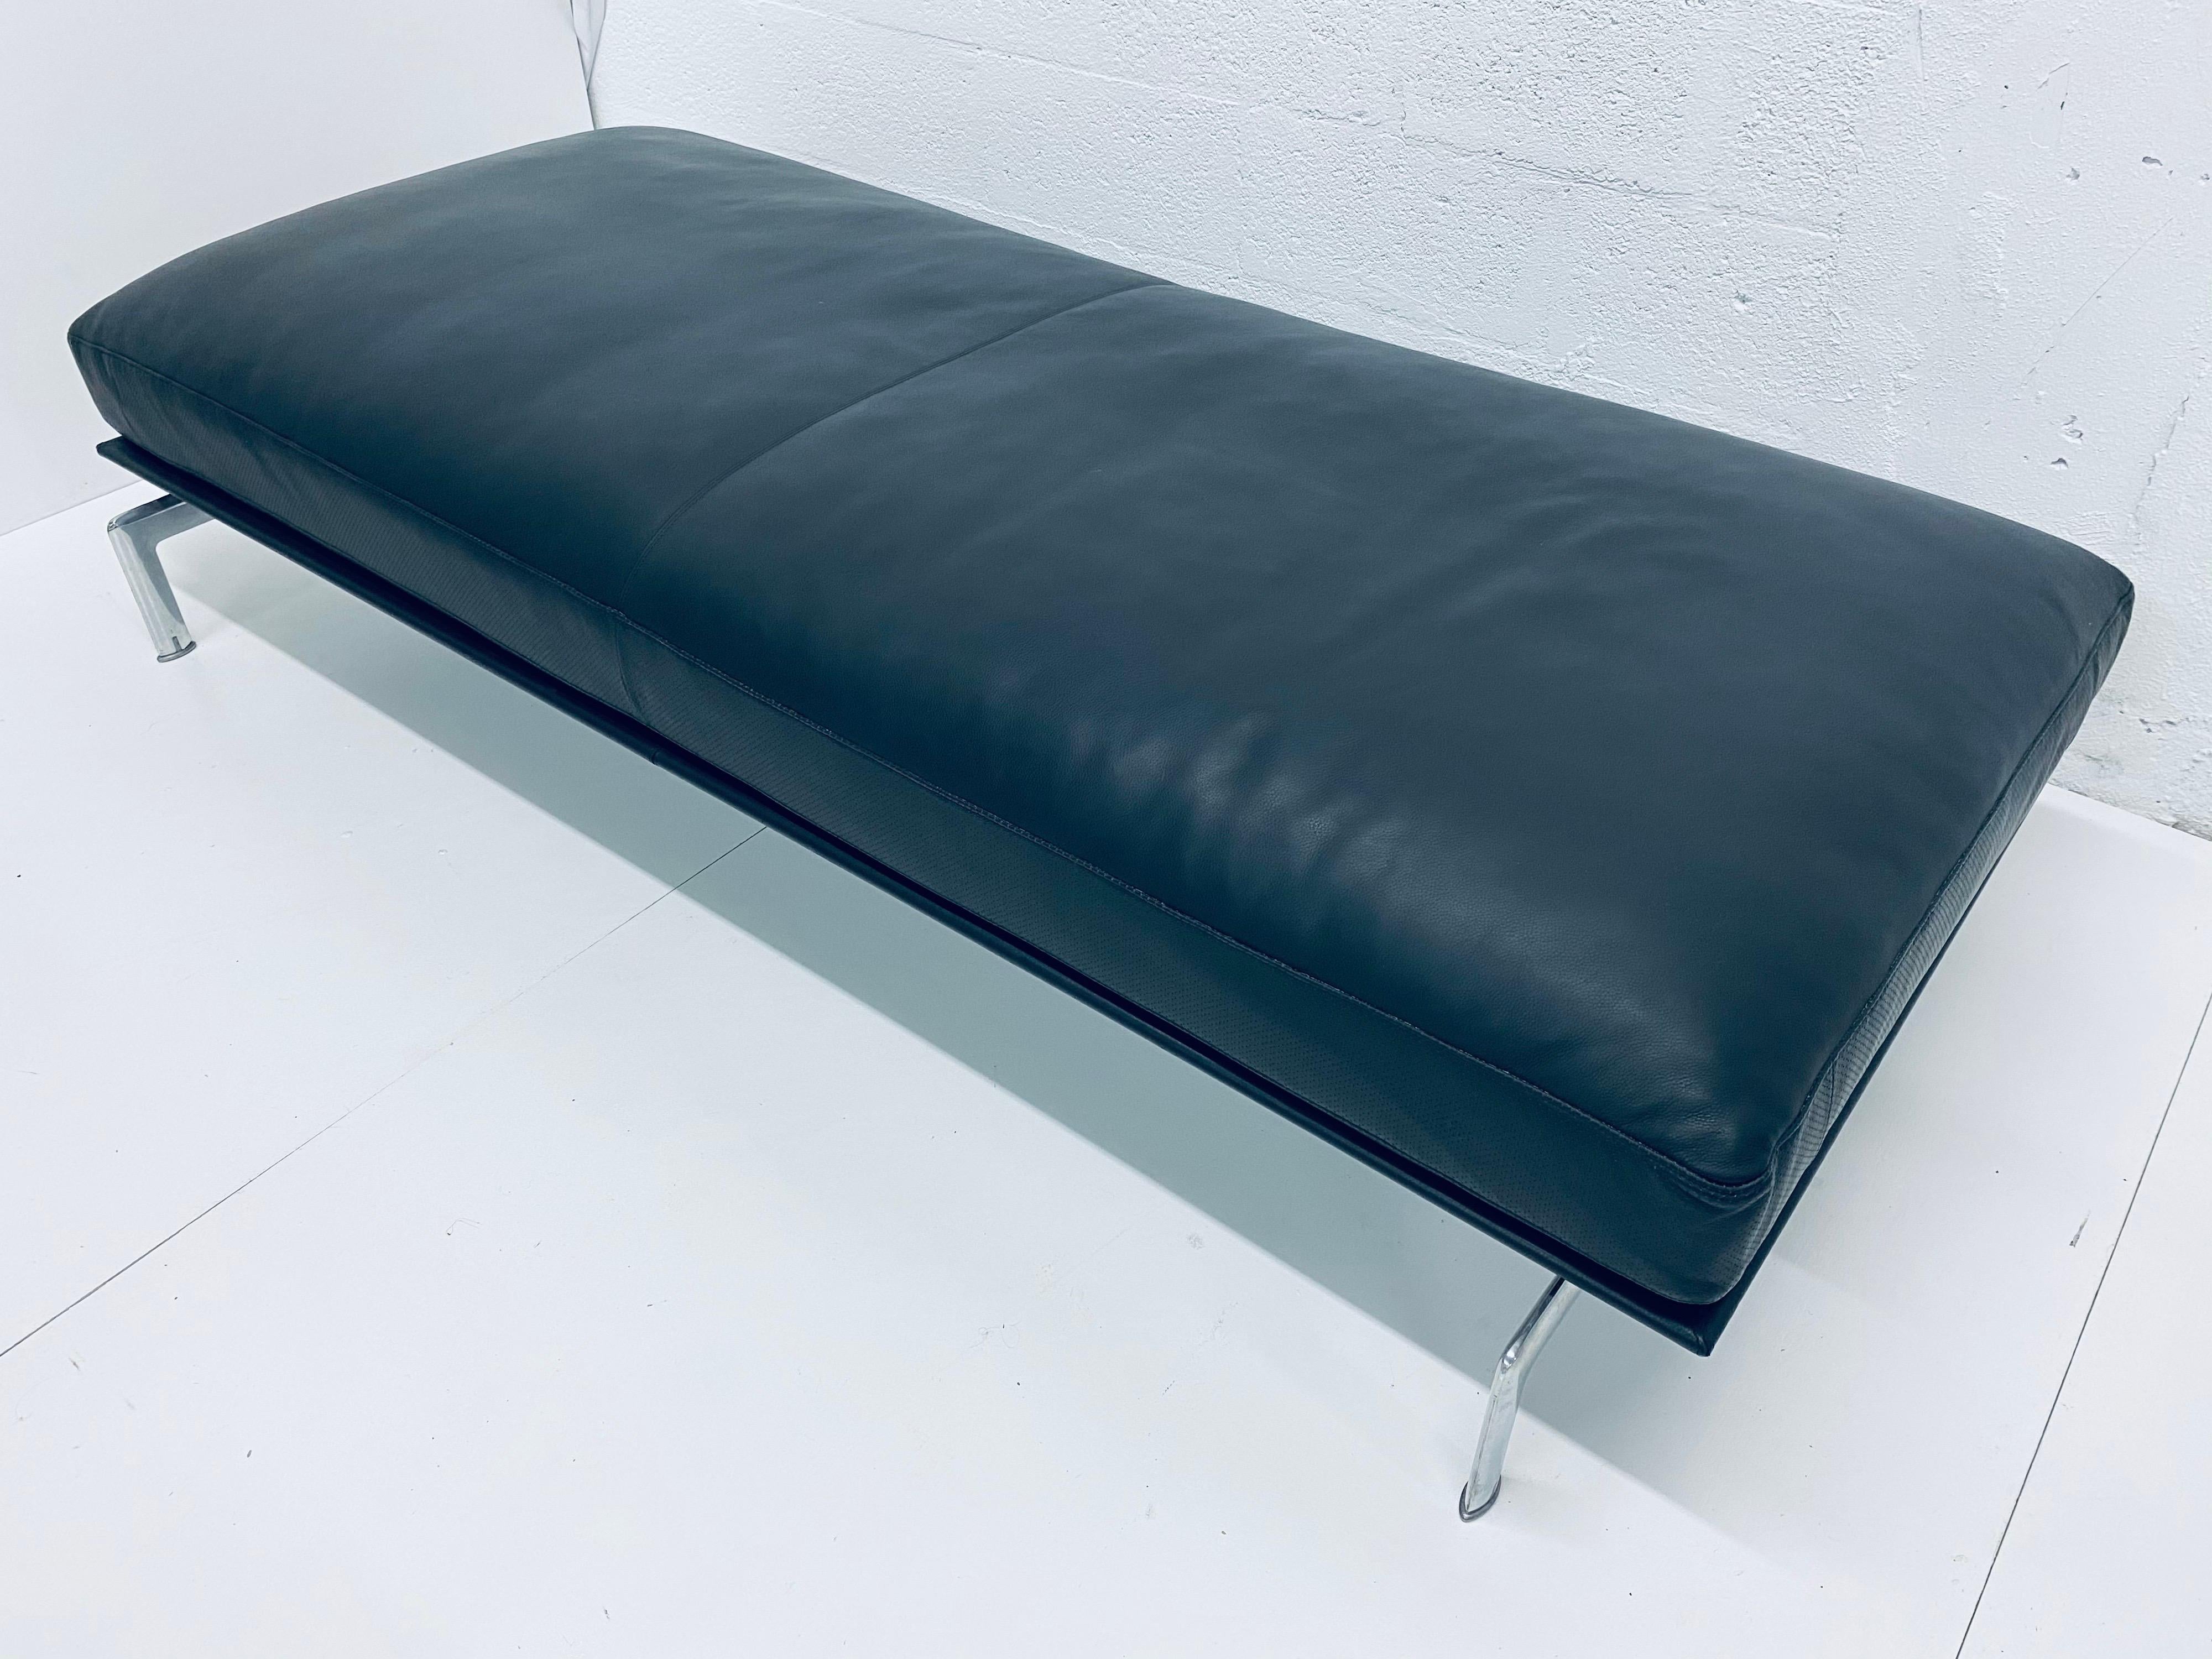 Designed by Antonio Citterio and Paolo Nava for B&B Italia, the Diesis bench is made with a black leather upholstered cushion with soft down filling and sits on a large leather wrapped steel base and chrome legs. Handcrafted and extremely